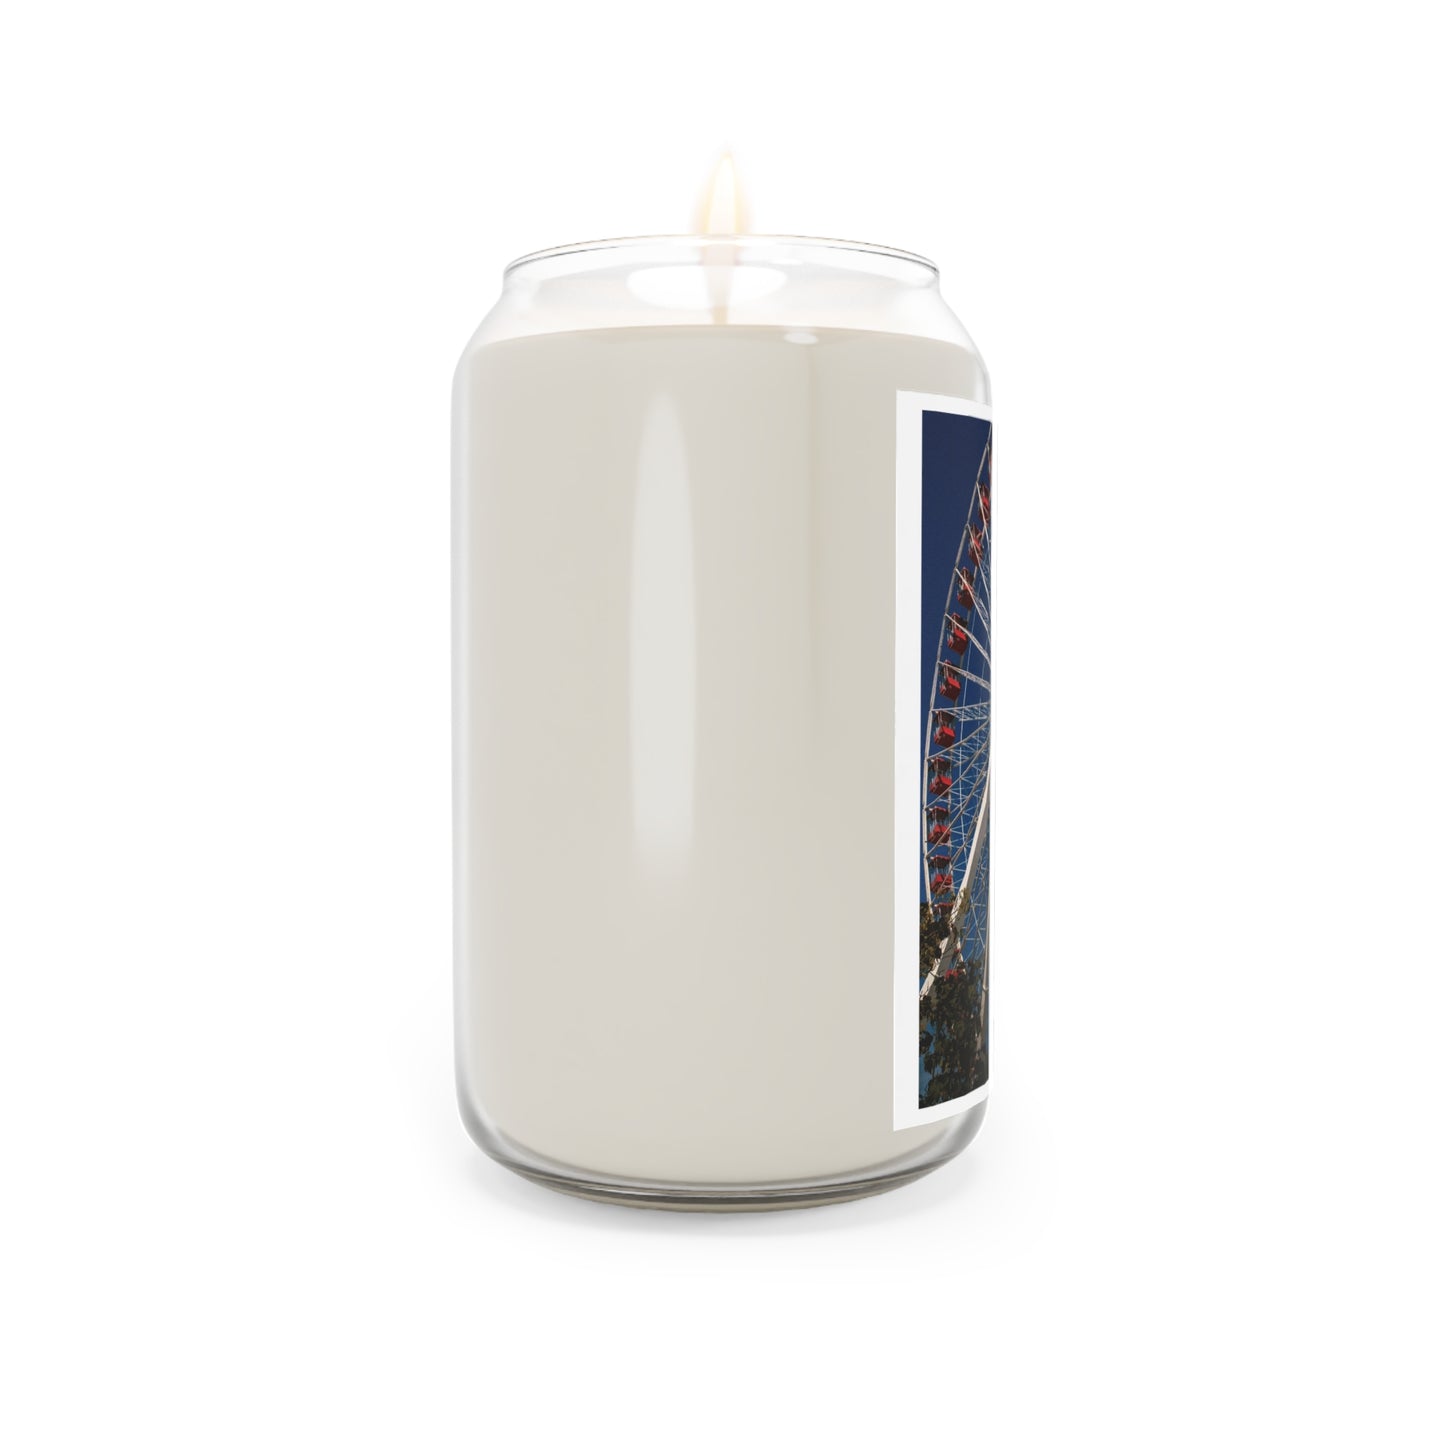 Chicago, Illinois (#028) - Home Town Candles, 13.75oz